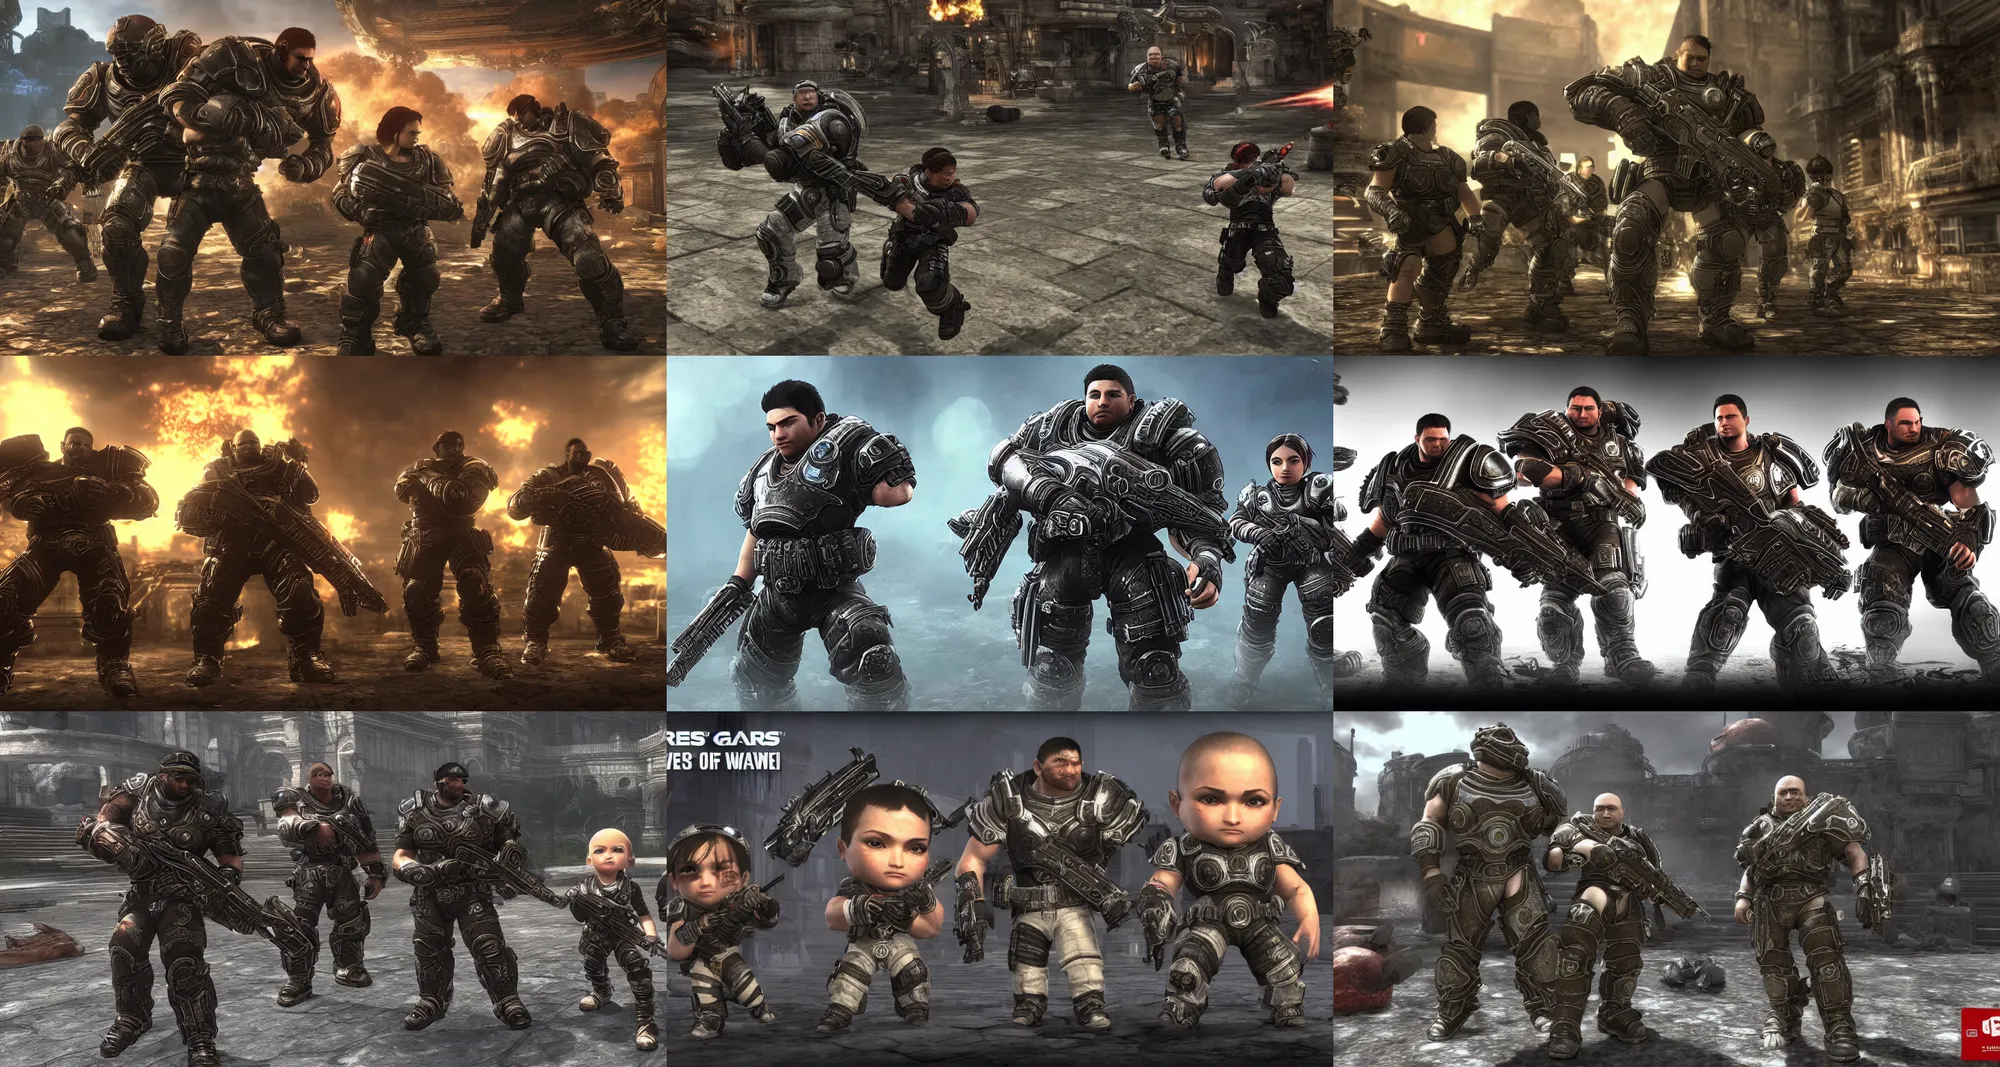 Prompt: Screenshot of 3d chibi fantasy characters in videogame 'gears of war'